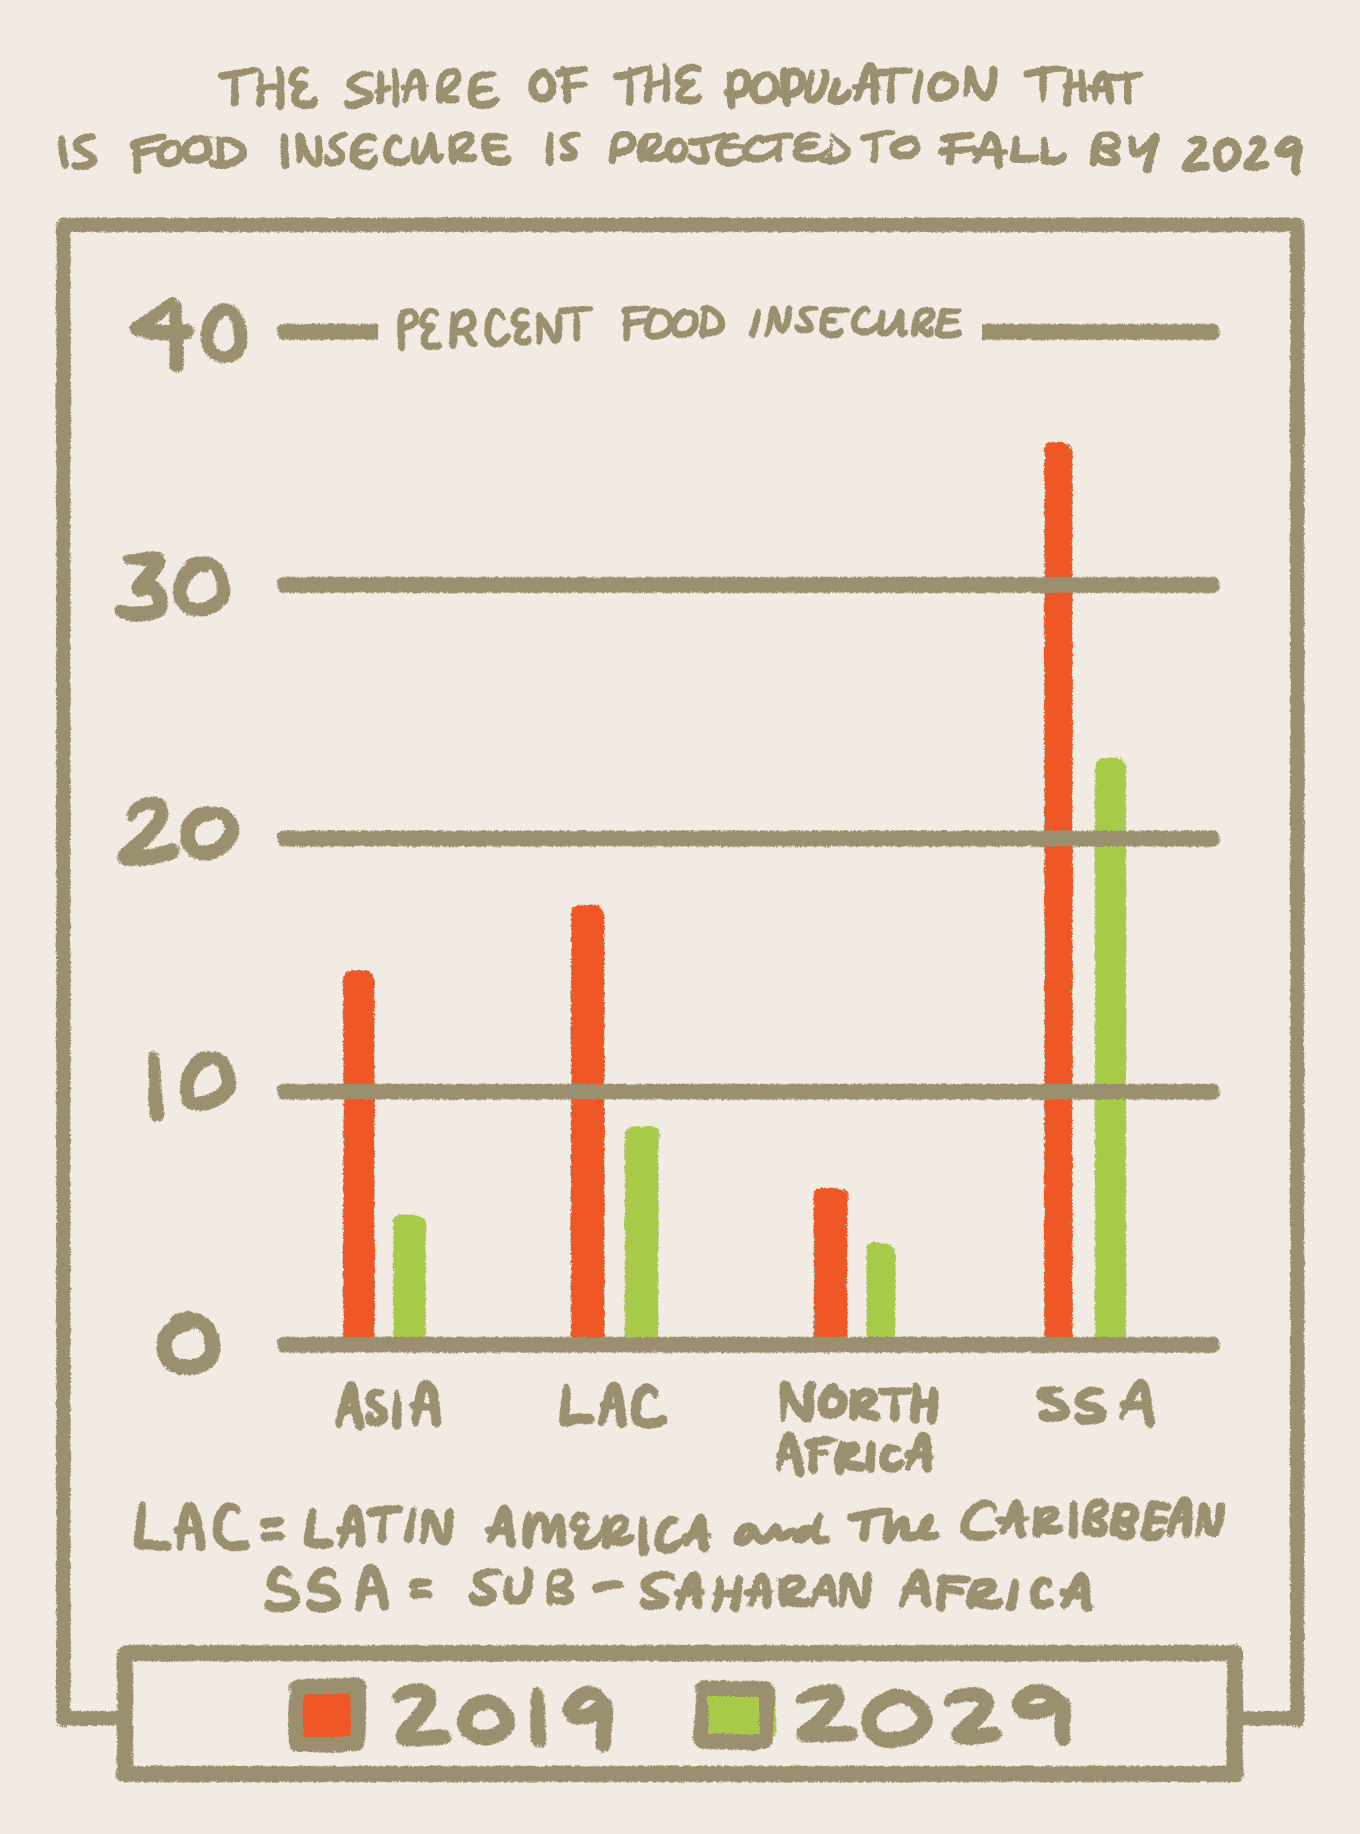 World Hunger Statistics Graph: The Share of the Population That Is Food Insecure Is Projected To Fall By 2029 / Graph showing decreases in food insecurity in Latin America, the Caribbean, Sub Saharan Africa, North Africa, and Asia